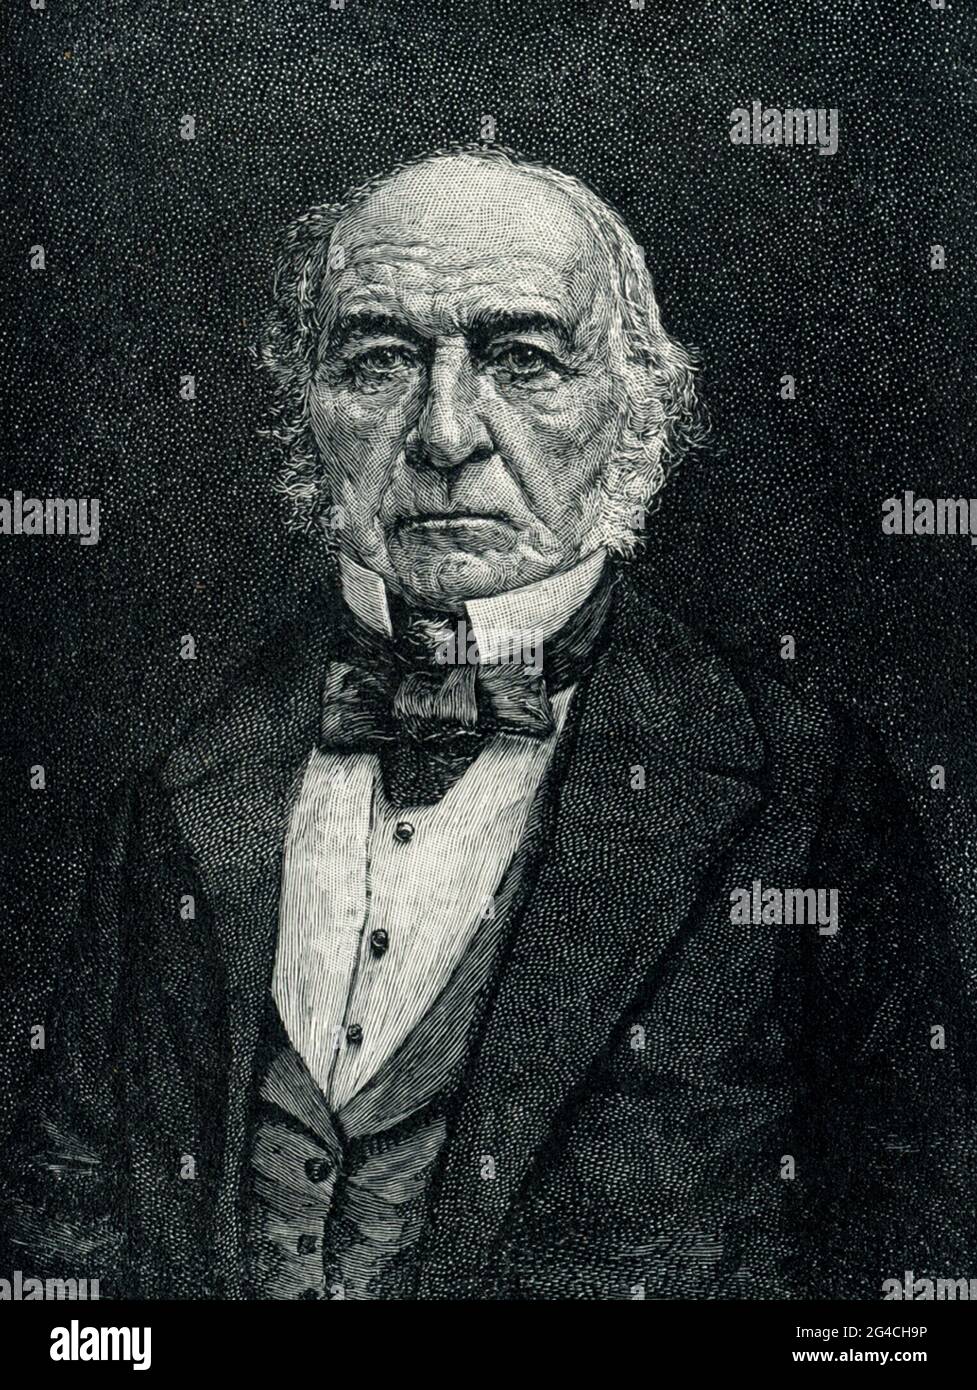 This 1899 illustration shows William Ewart Gladstone. Gladstone was a British statesman and Liberal politician. In a career lasting over 60 years, he served for 12 years as Prime Minister of the United Kingdom, spread over four terms beginning in 1868 and ending in 1894. Stock Photo